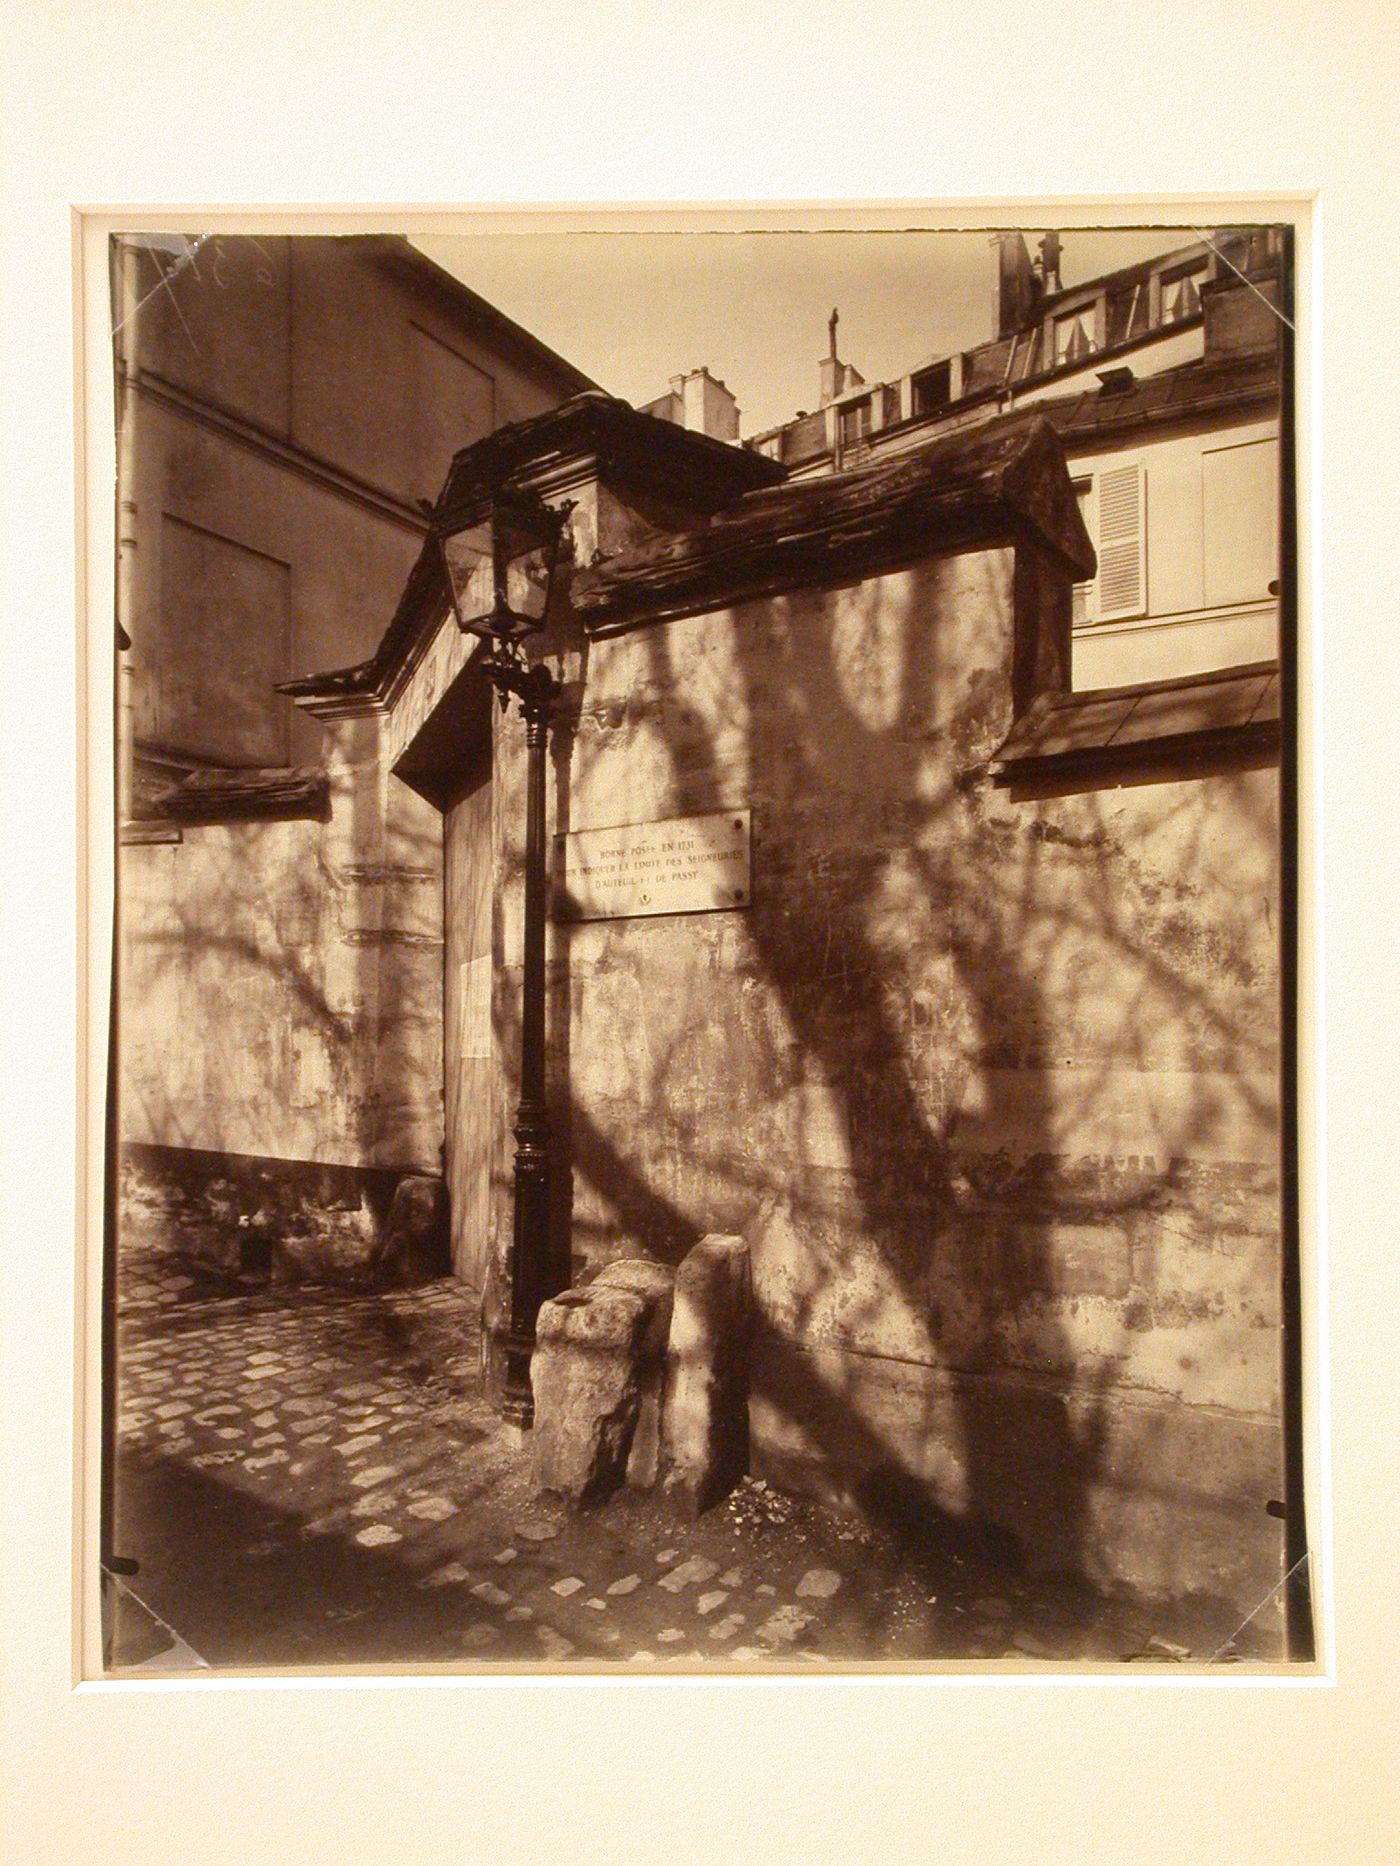 Maison de Balzac, showing front entrance in wall, street lamp and tree shadows, Paris, France